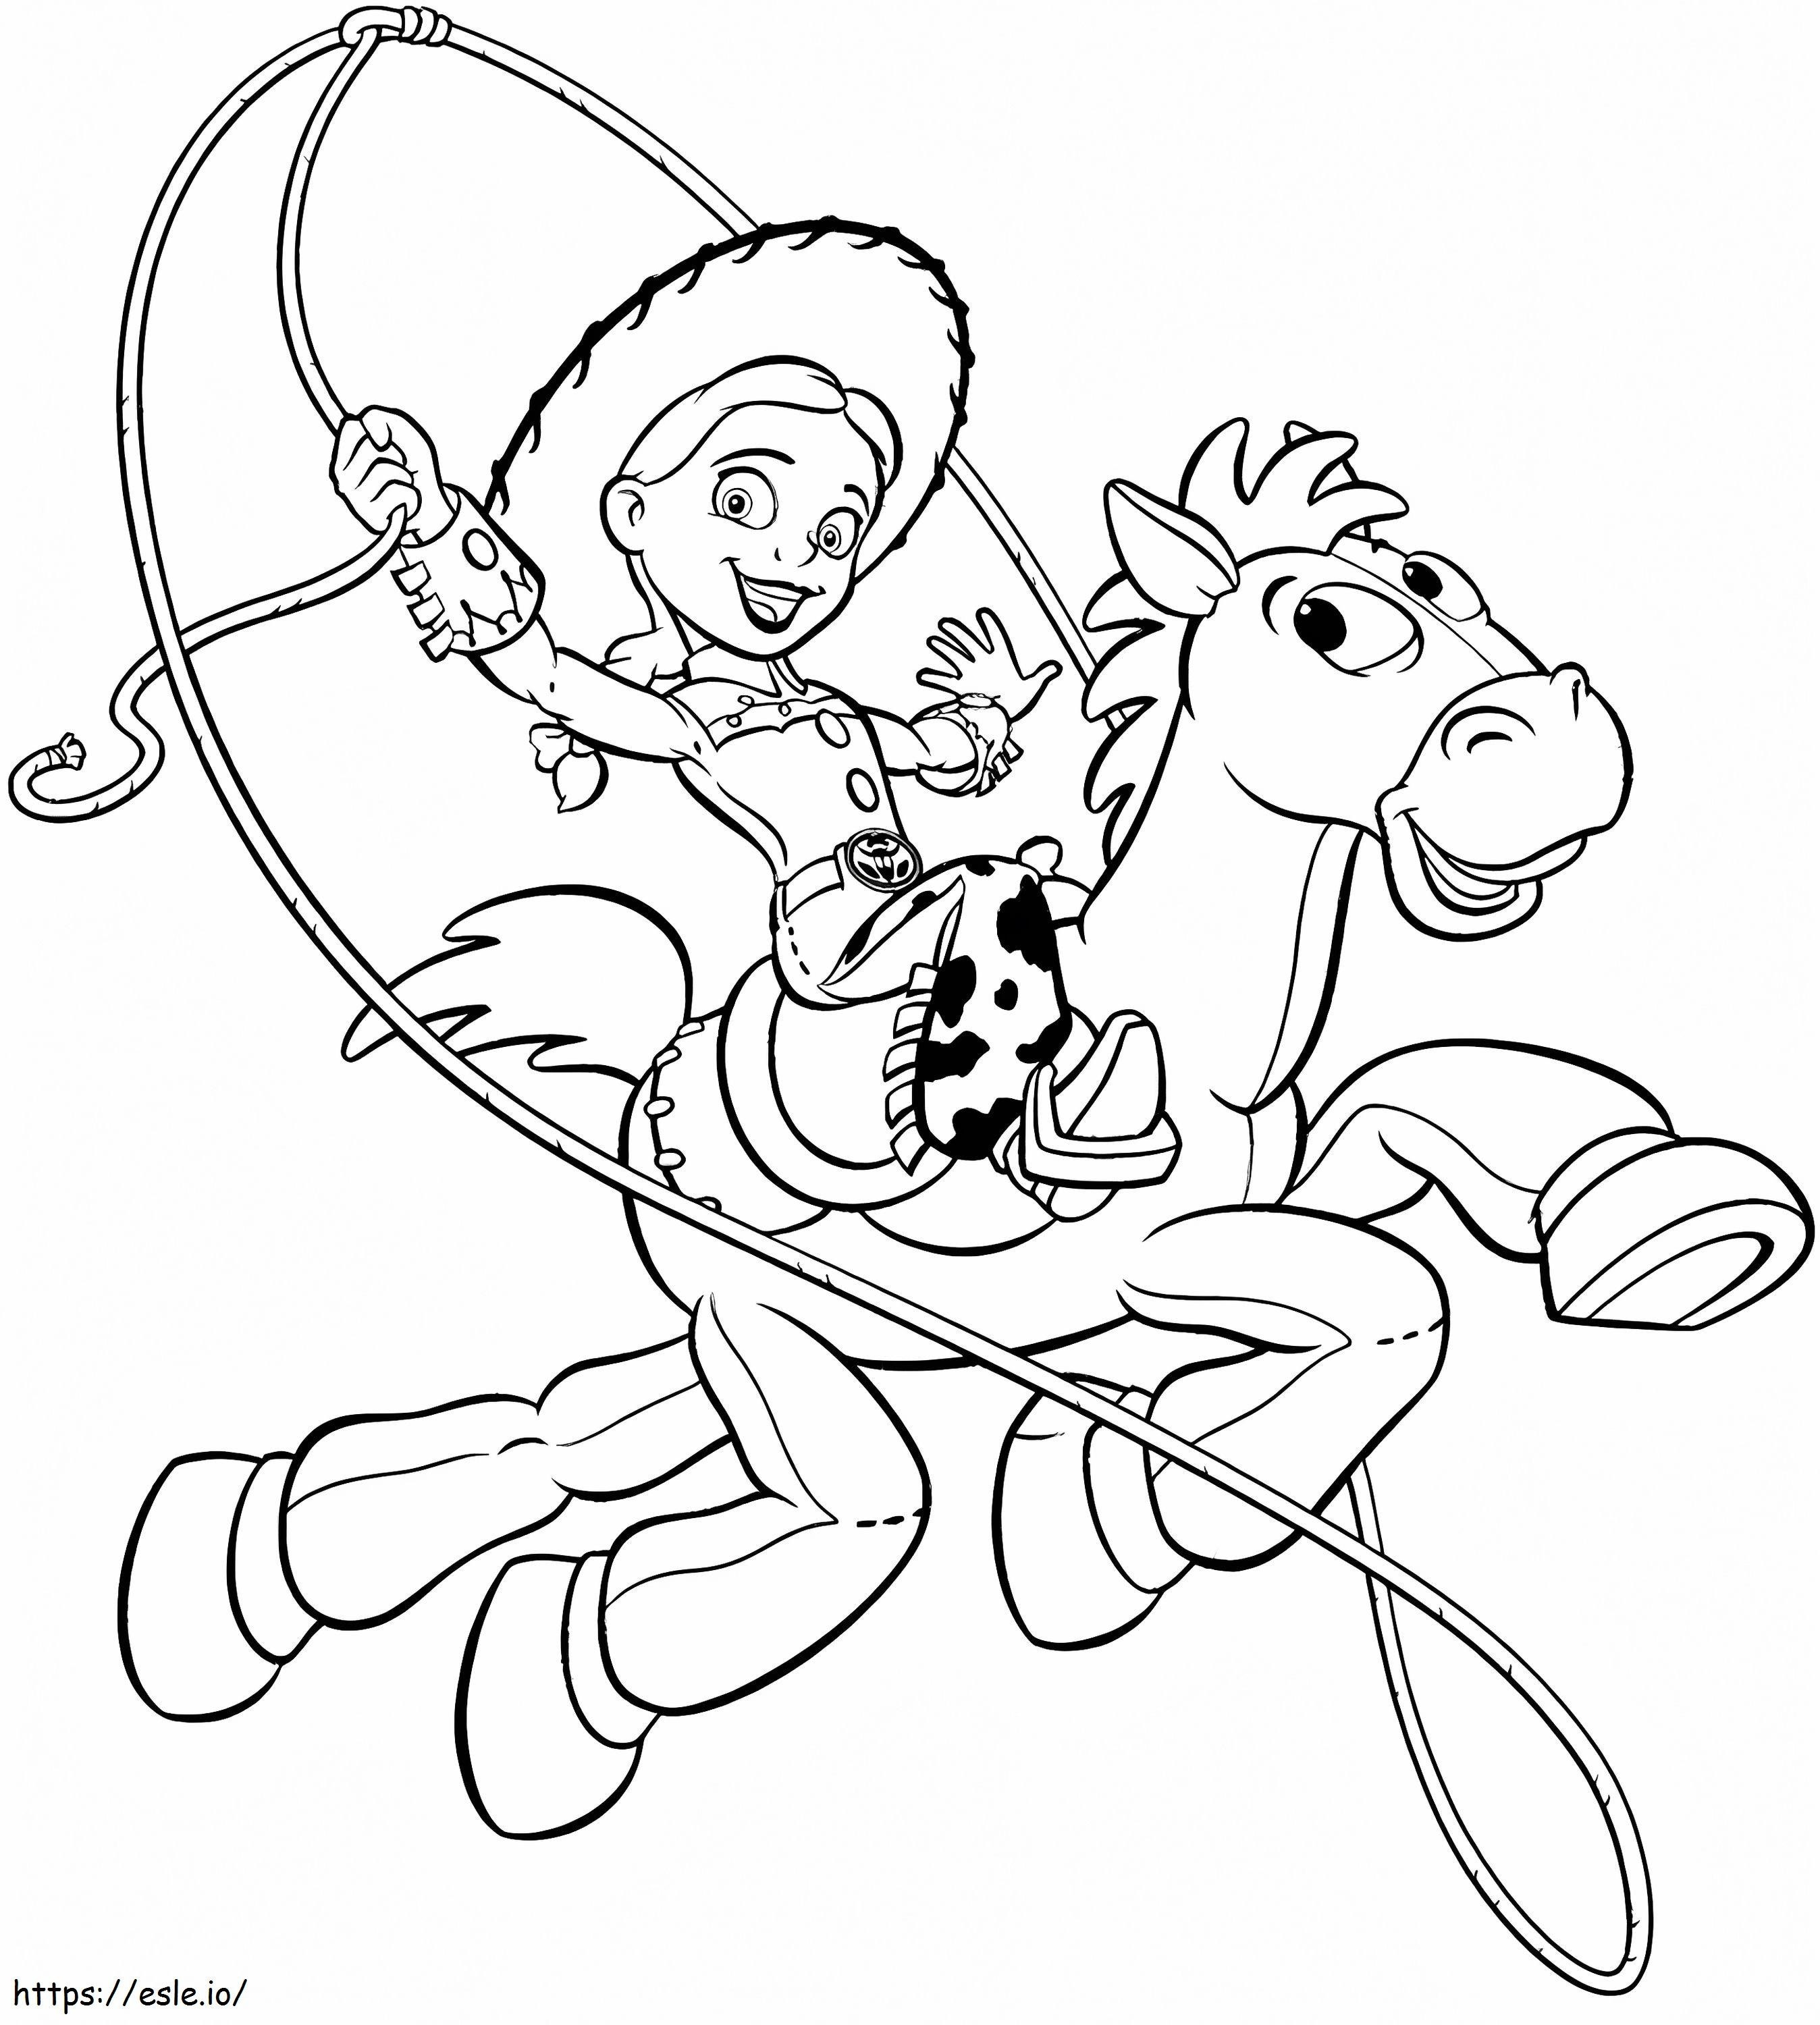 1559876992 Jessie Riding Bullseye A4 coloring page